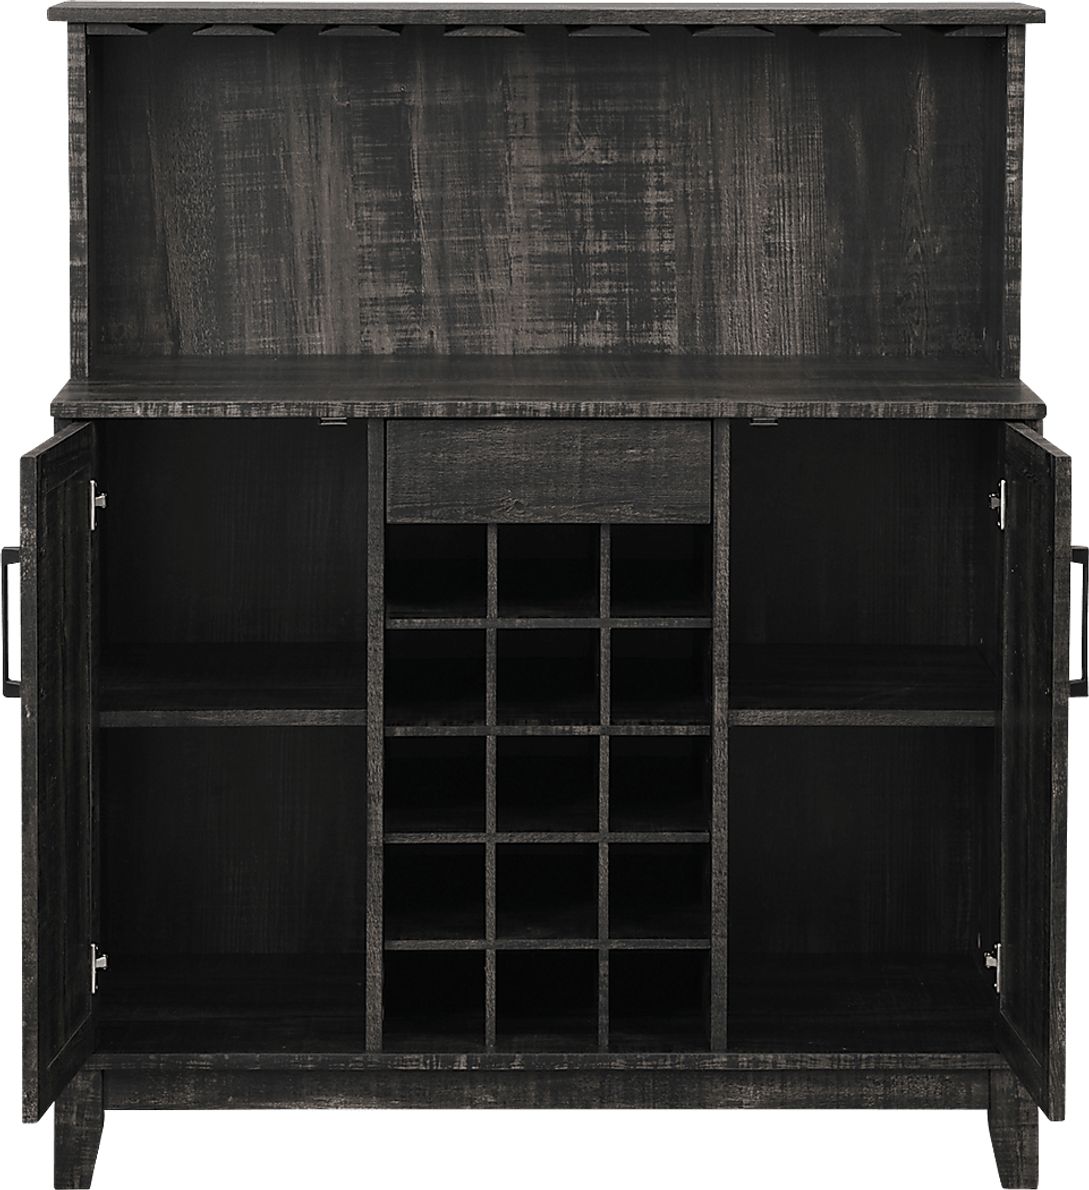 Mankato Charcoal Bar Cabinet - Rooms To Go